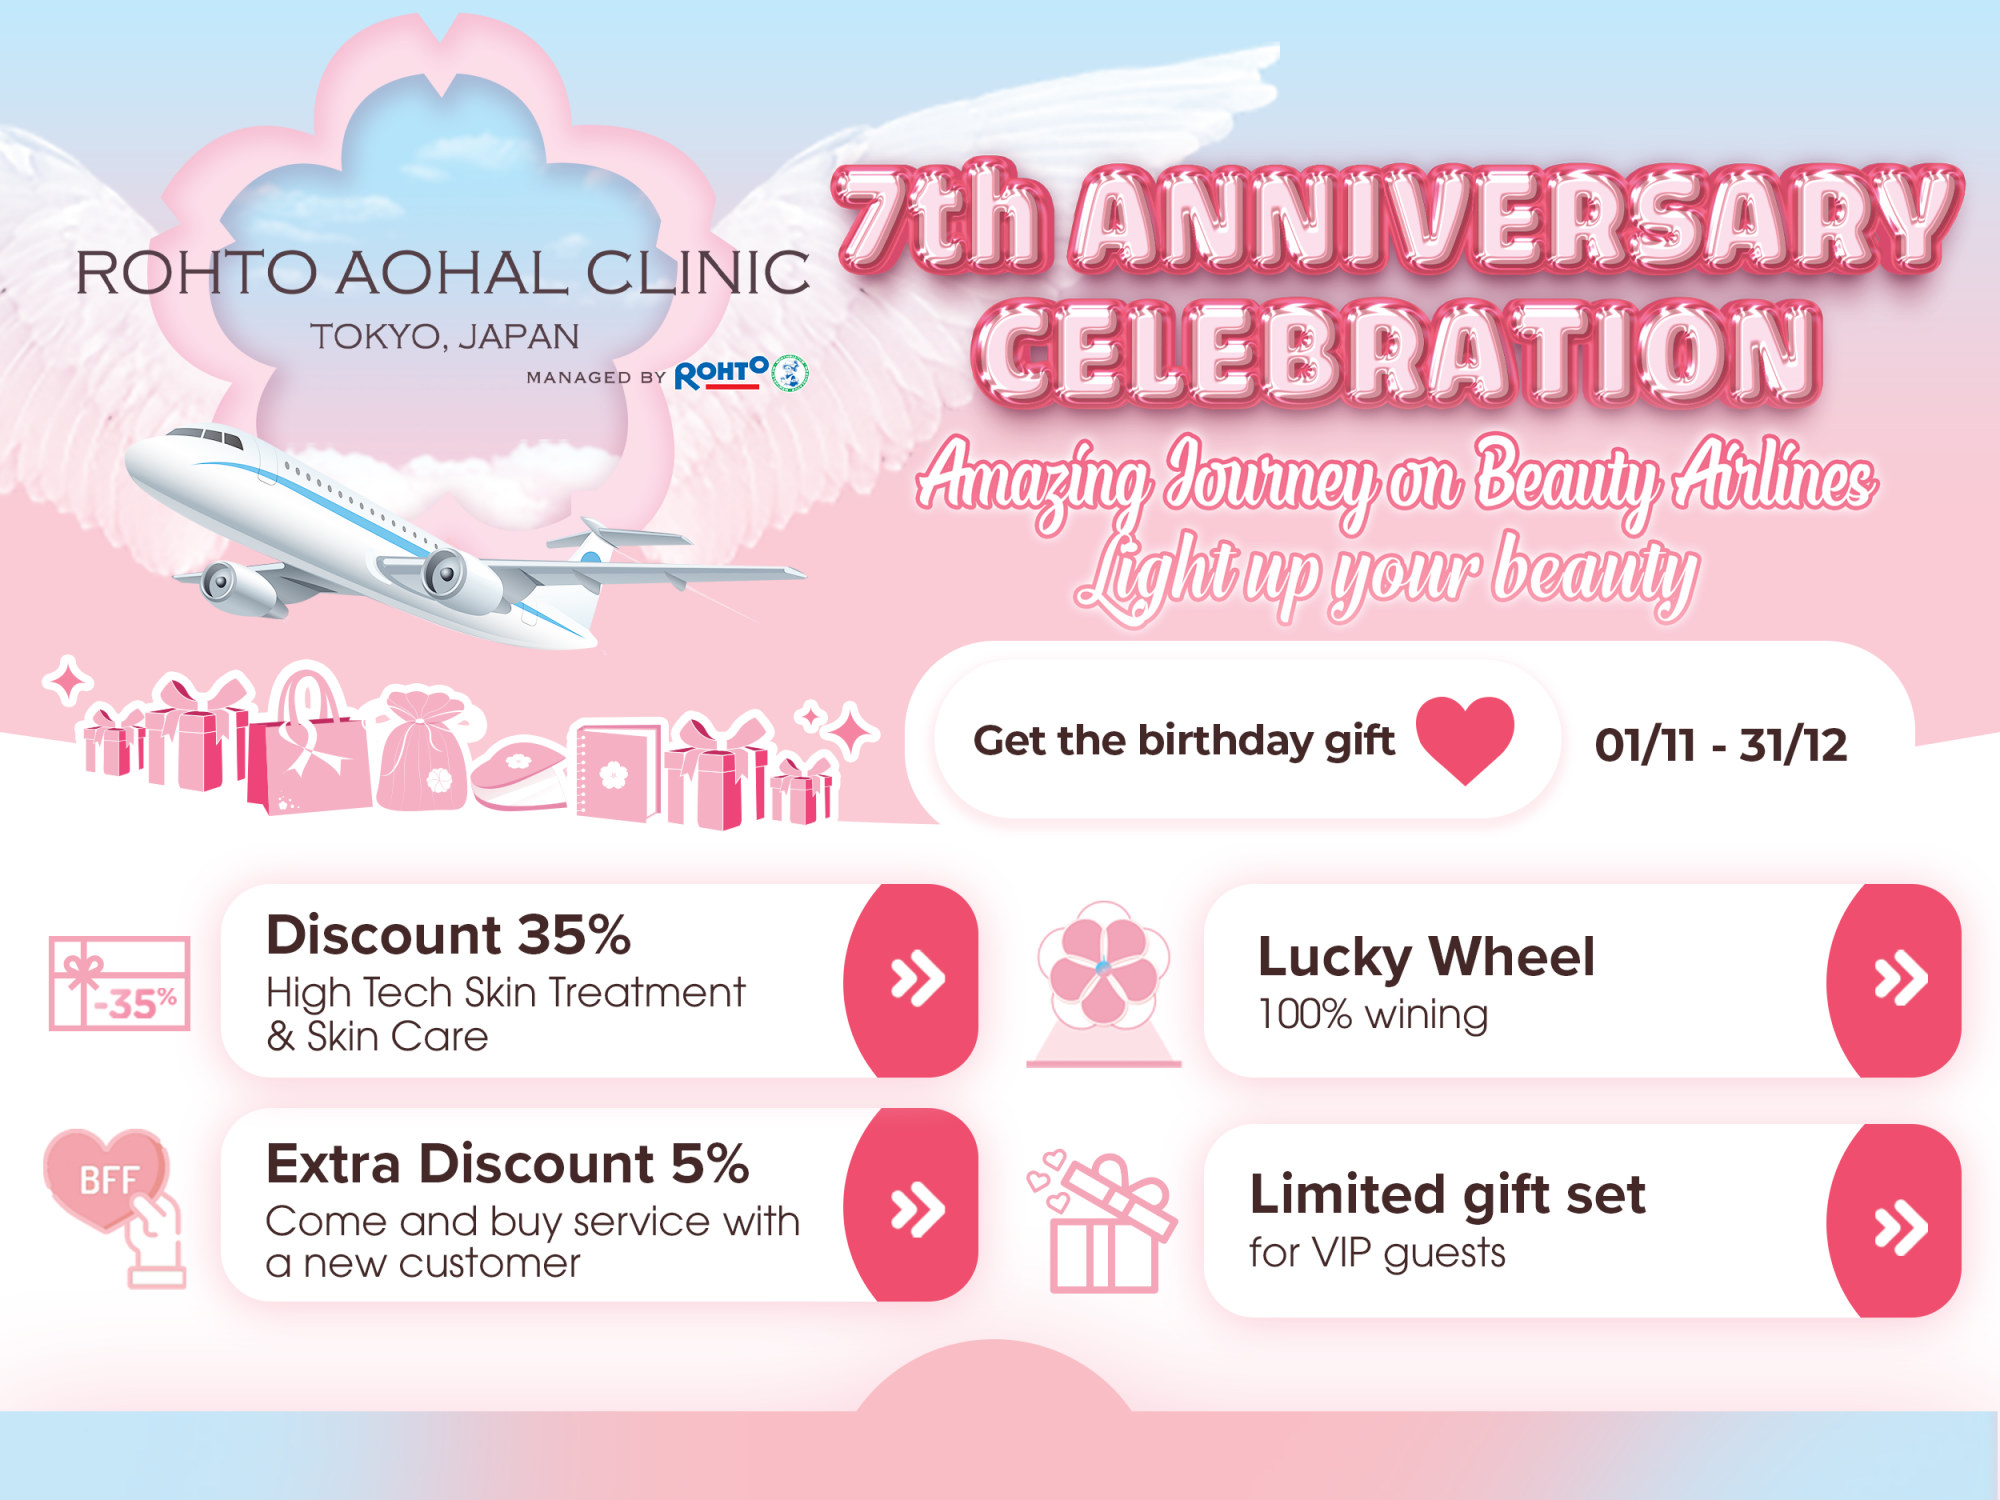 Jubilant series of events to celebrate the 7th anniversary of ROHTO AOHAL CLINIC invite you to participate and receive gifts!